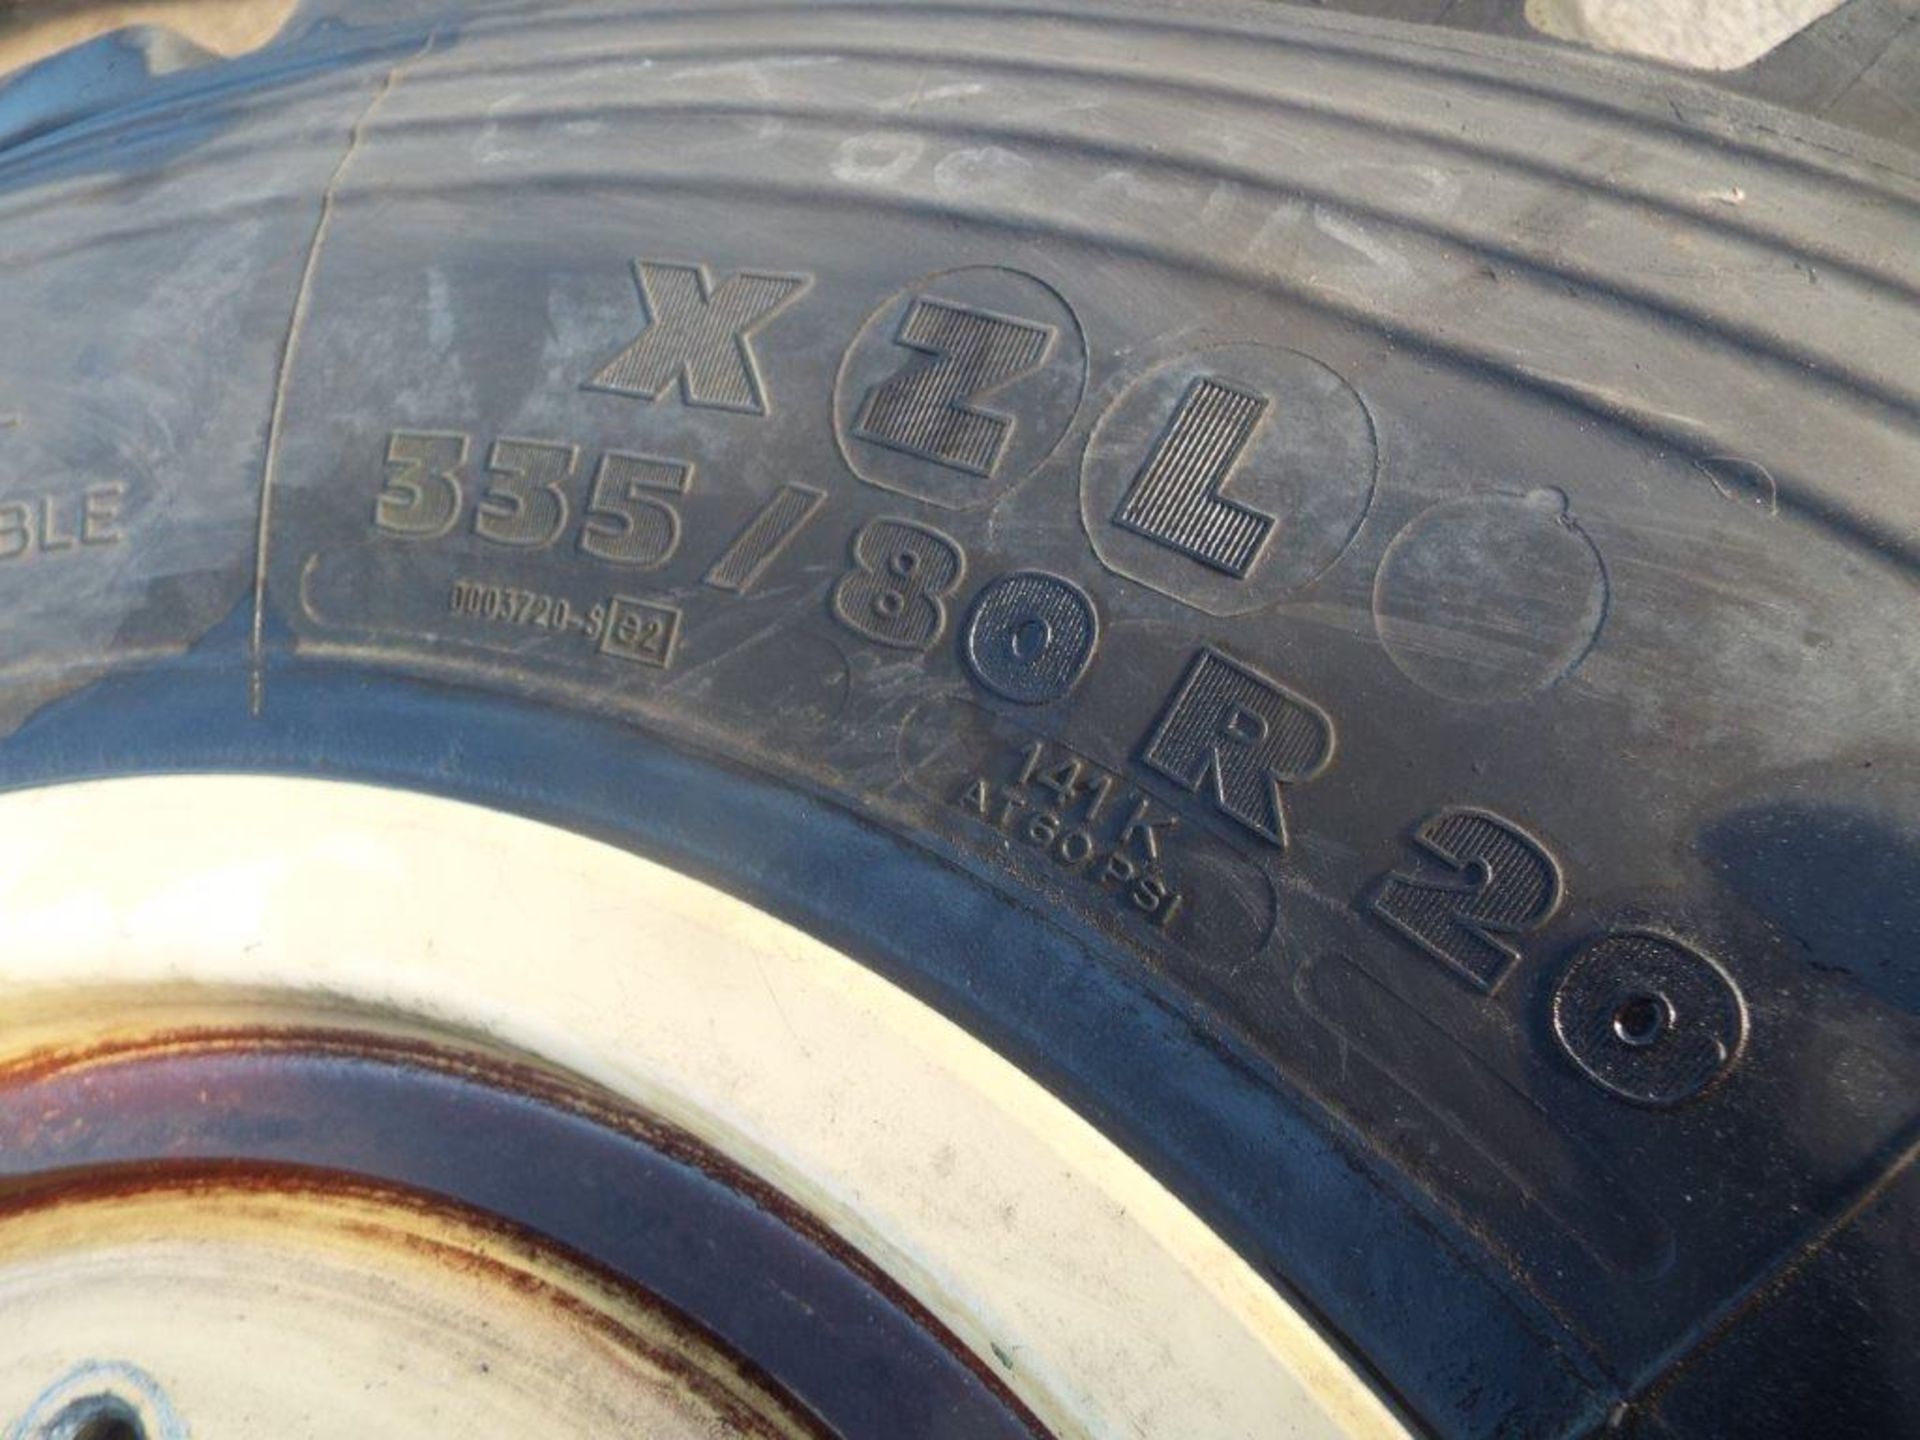 3 x Michelin XZL335/80 R20 Tyres with 10 Stud Rims - Image 6 of 8